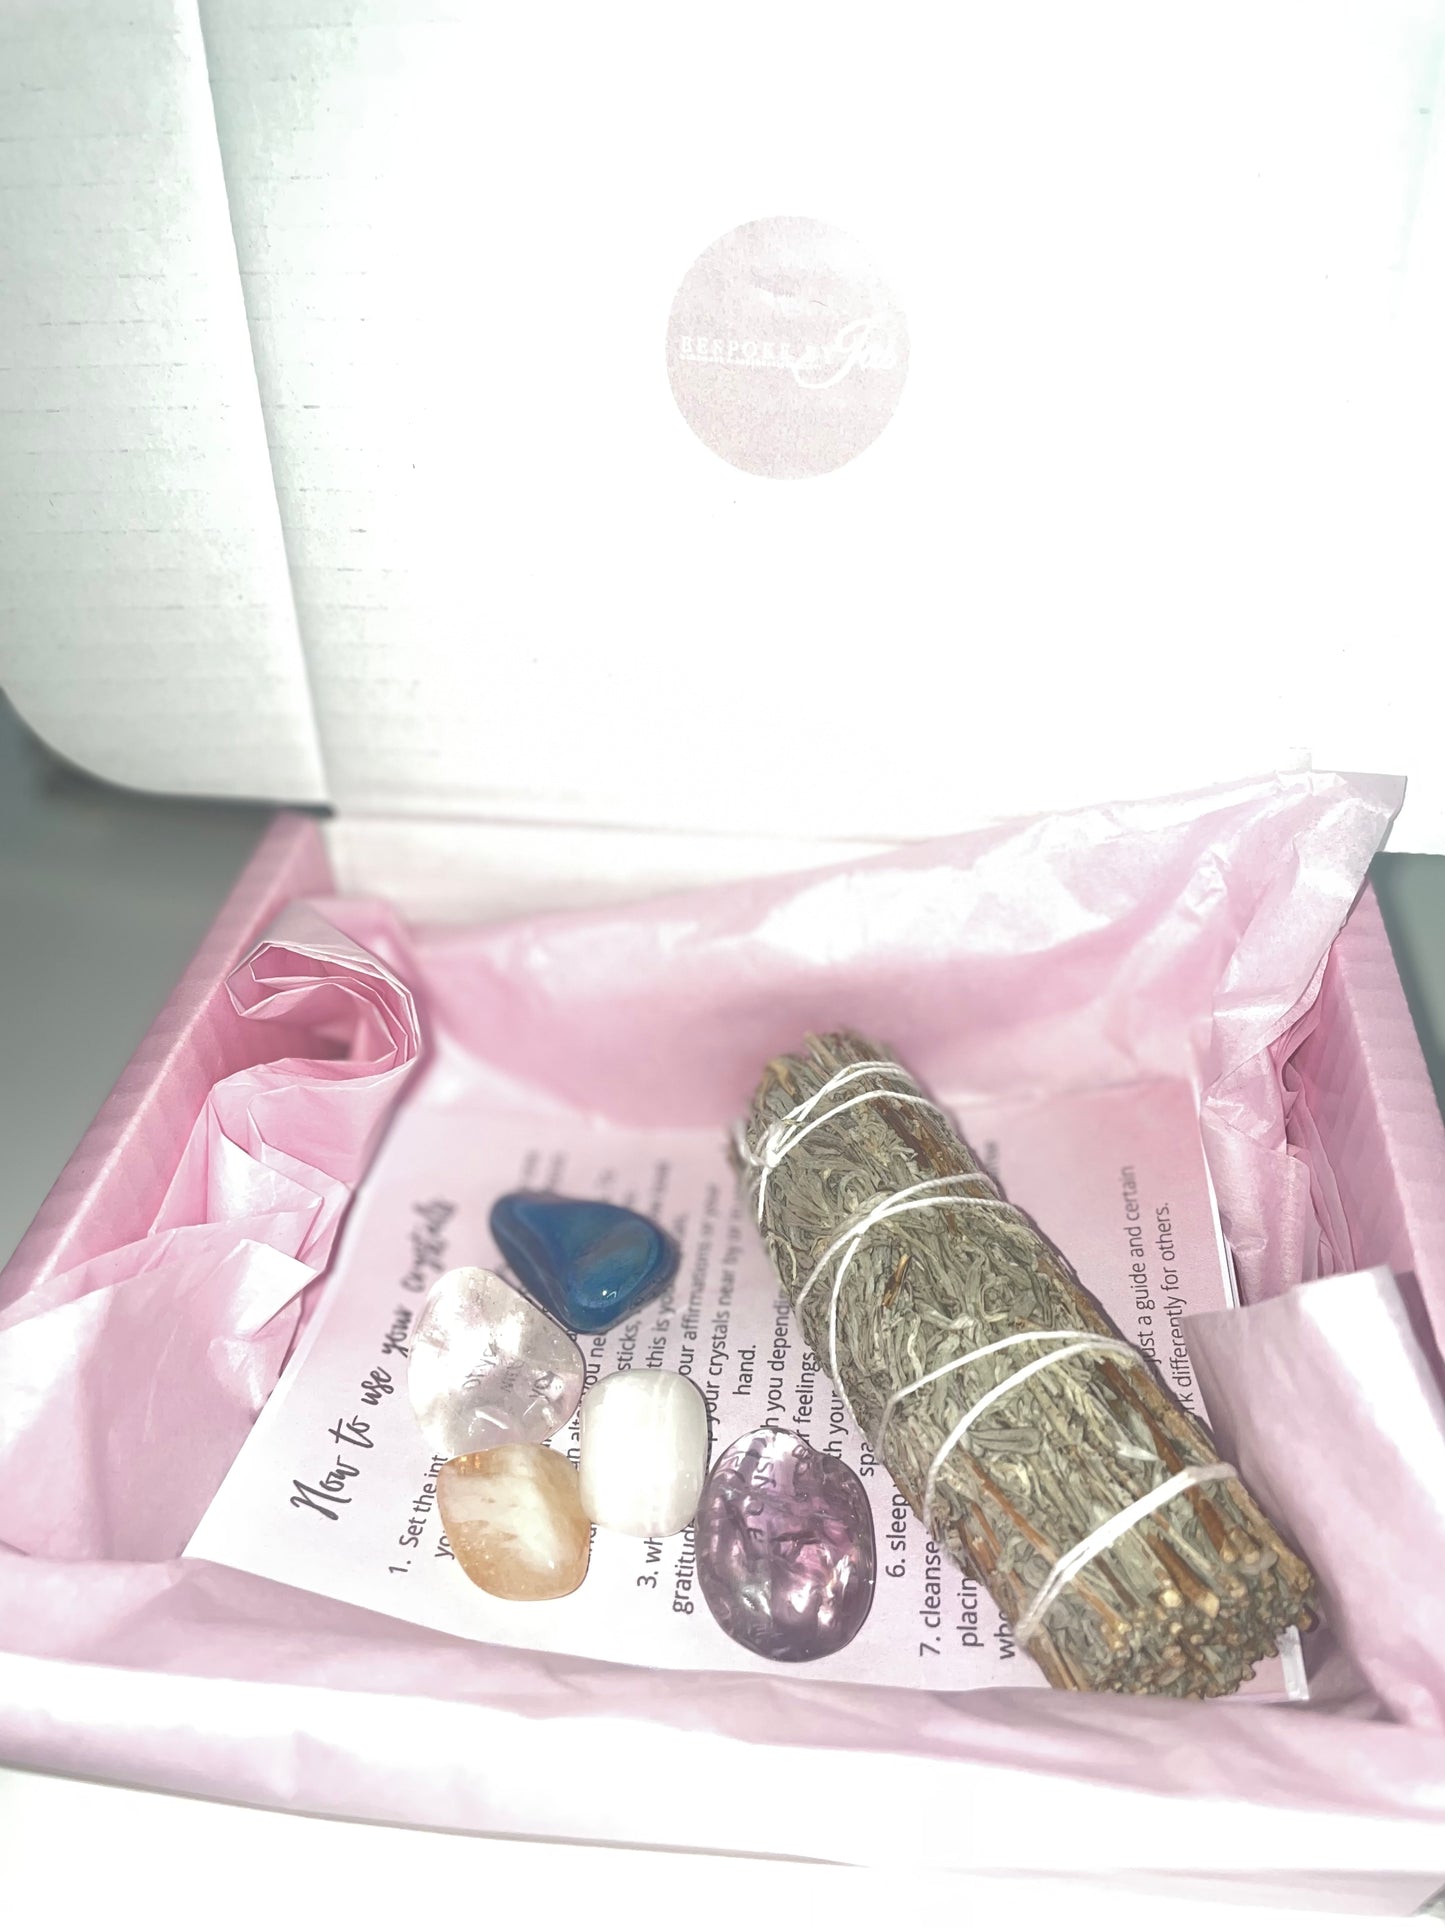 Crystals + cleanse with Jai